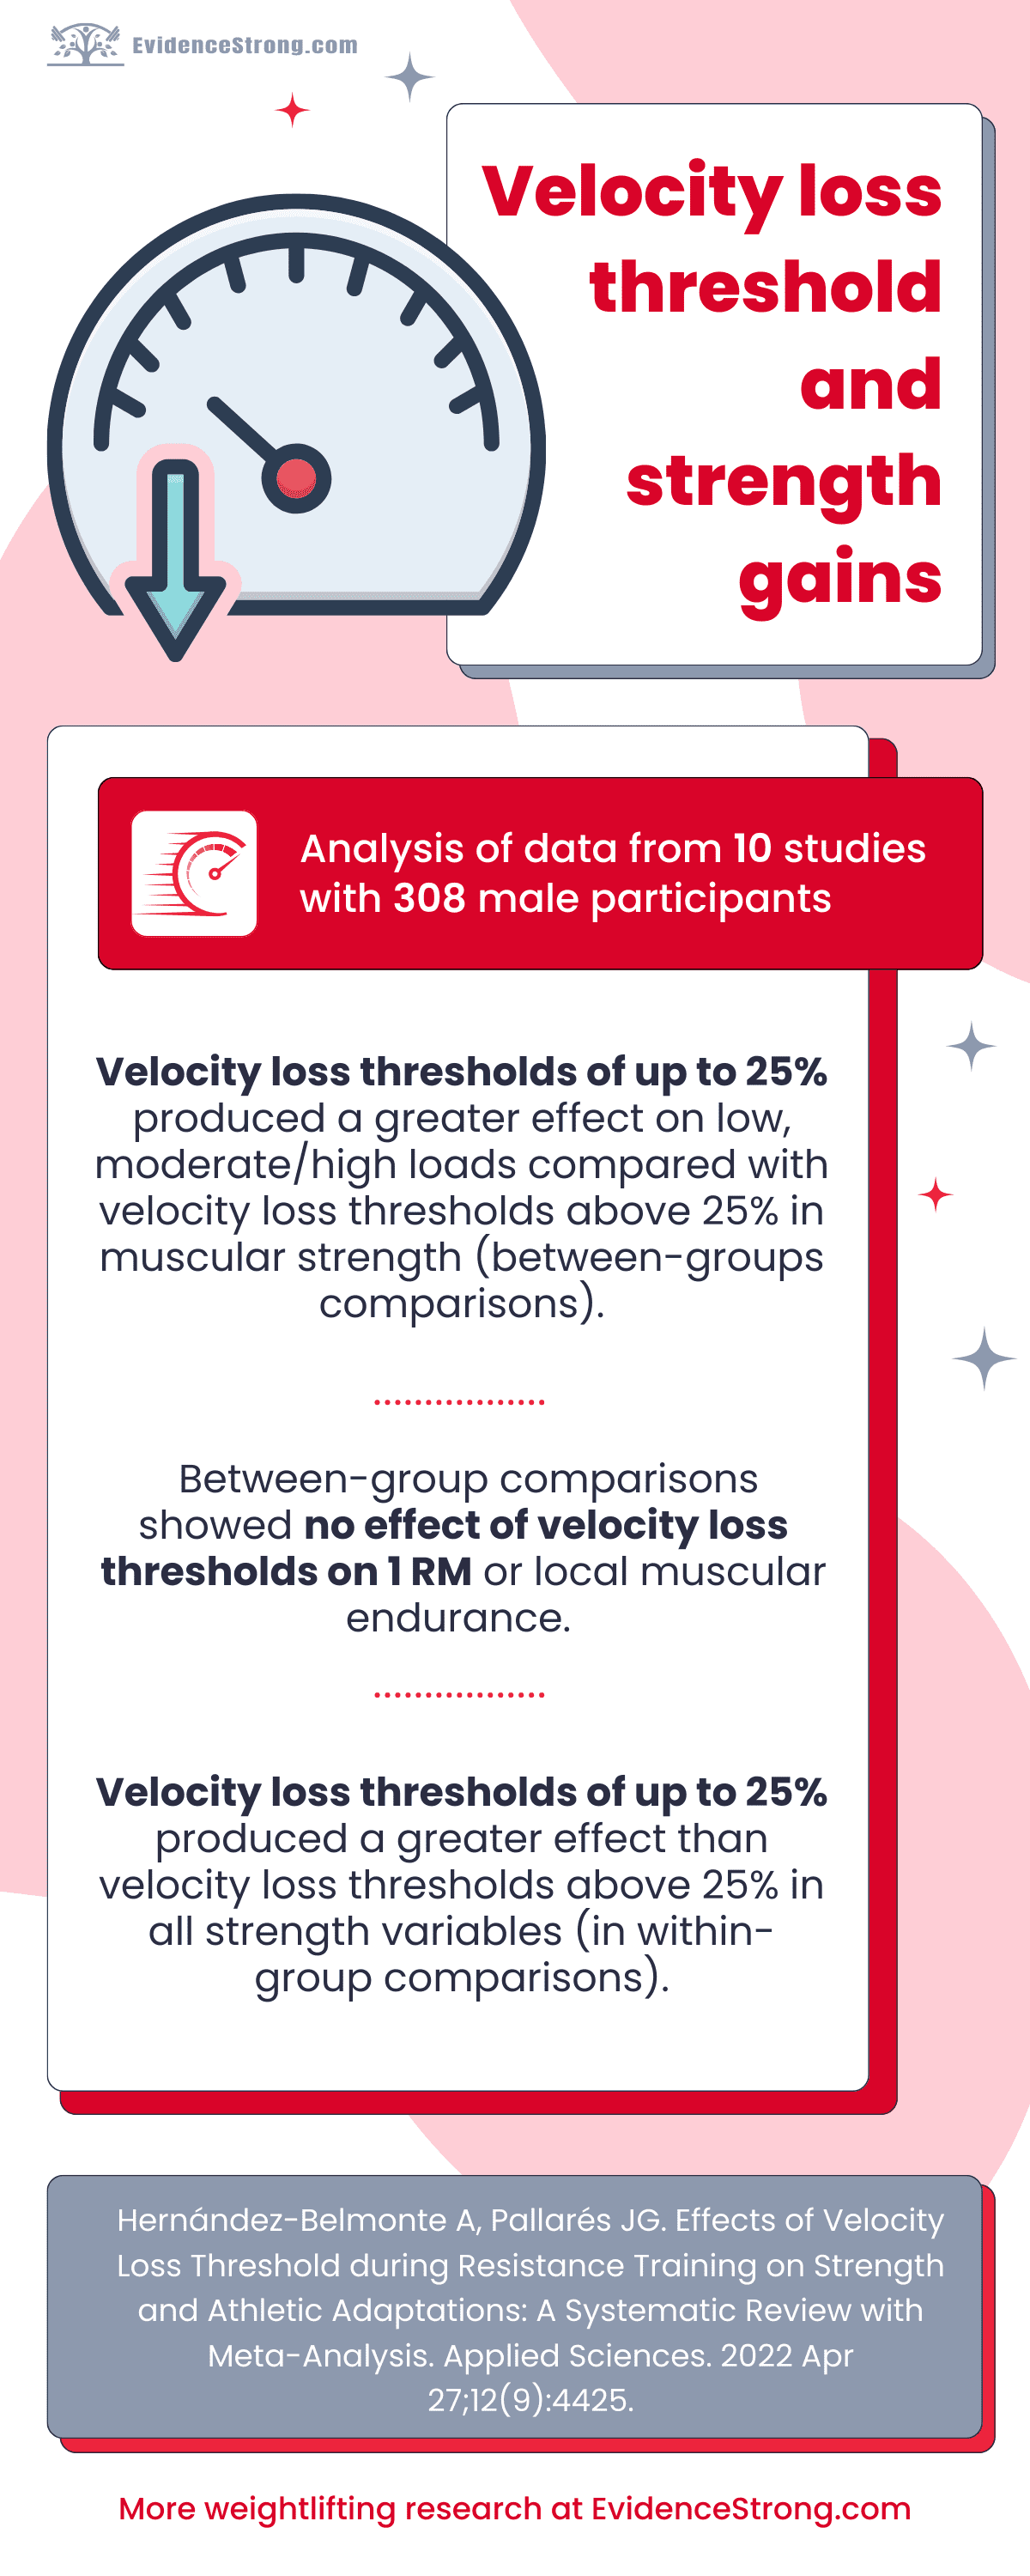 Velocity loss threshold and strength gains - Infographic